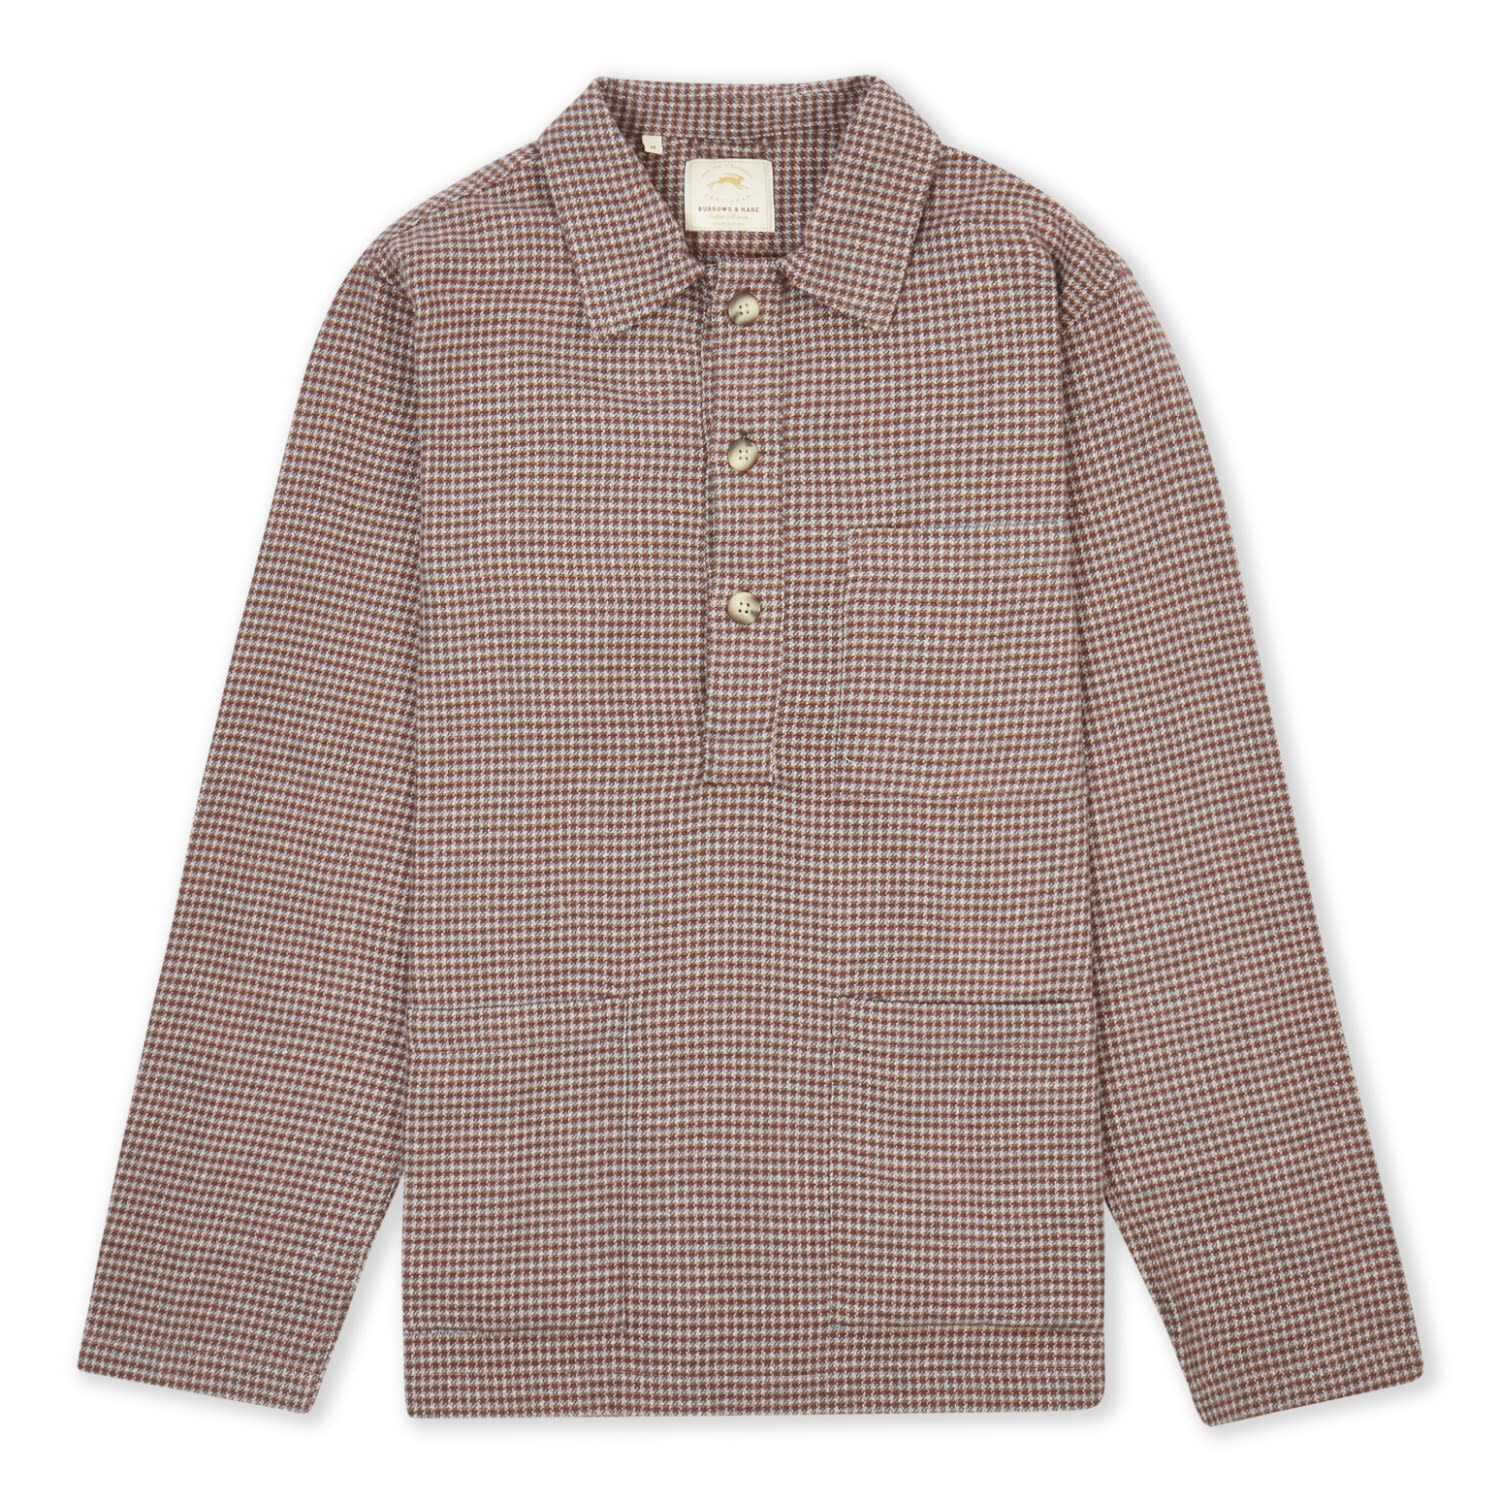 Men's Neutrals Houndstooth Pull Over Shirt - Rust Extra Large Burrows & Hare